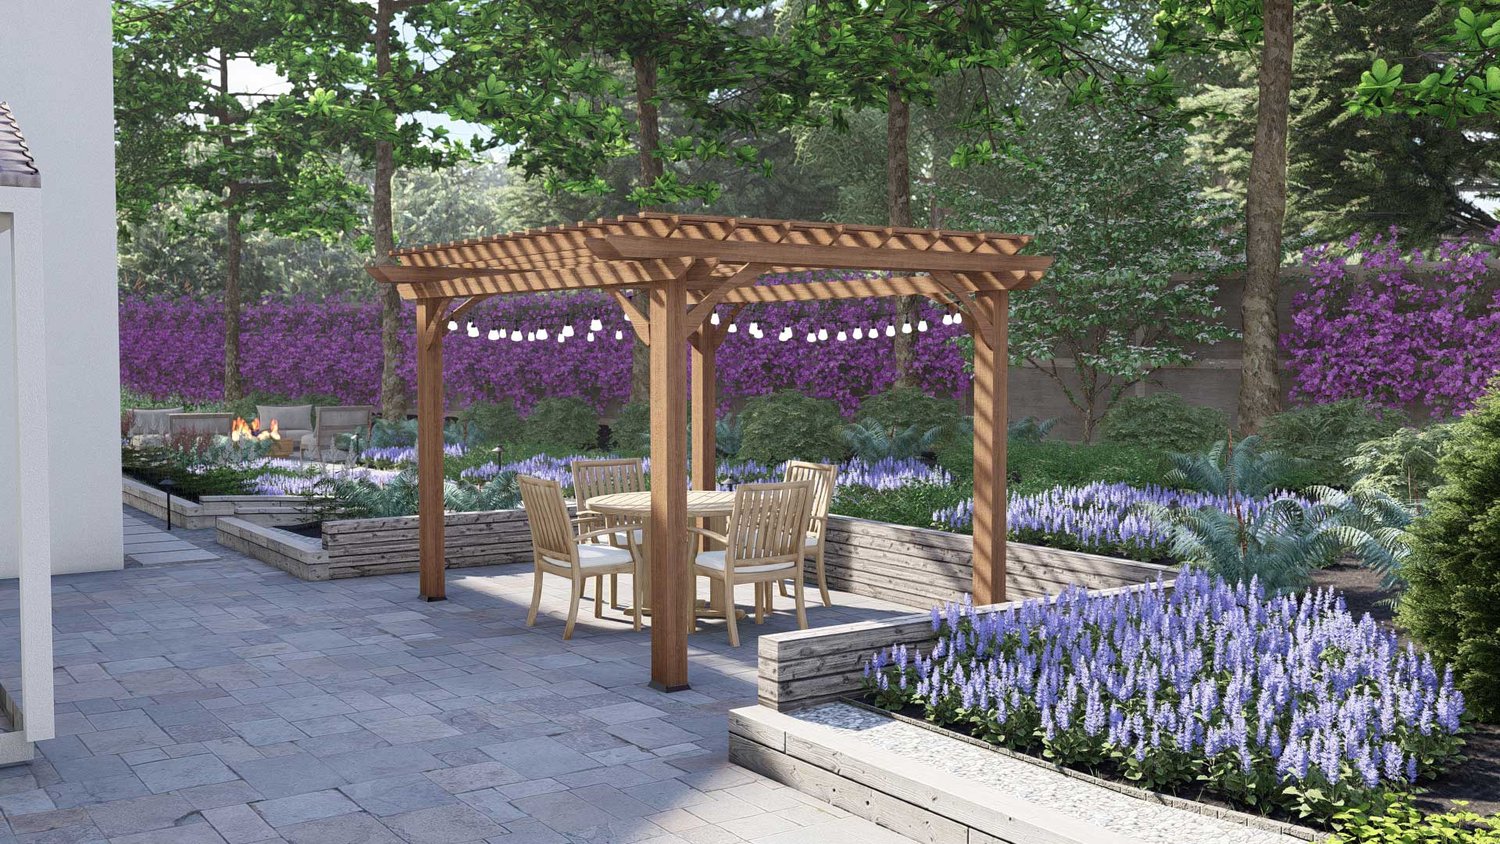 Arlington backyard showing paver patio with pergola over seating area, and beautiful floral surrounding